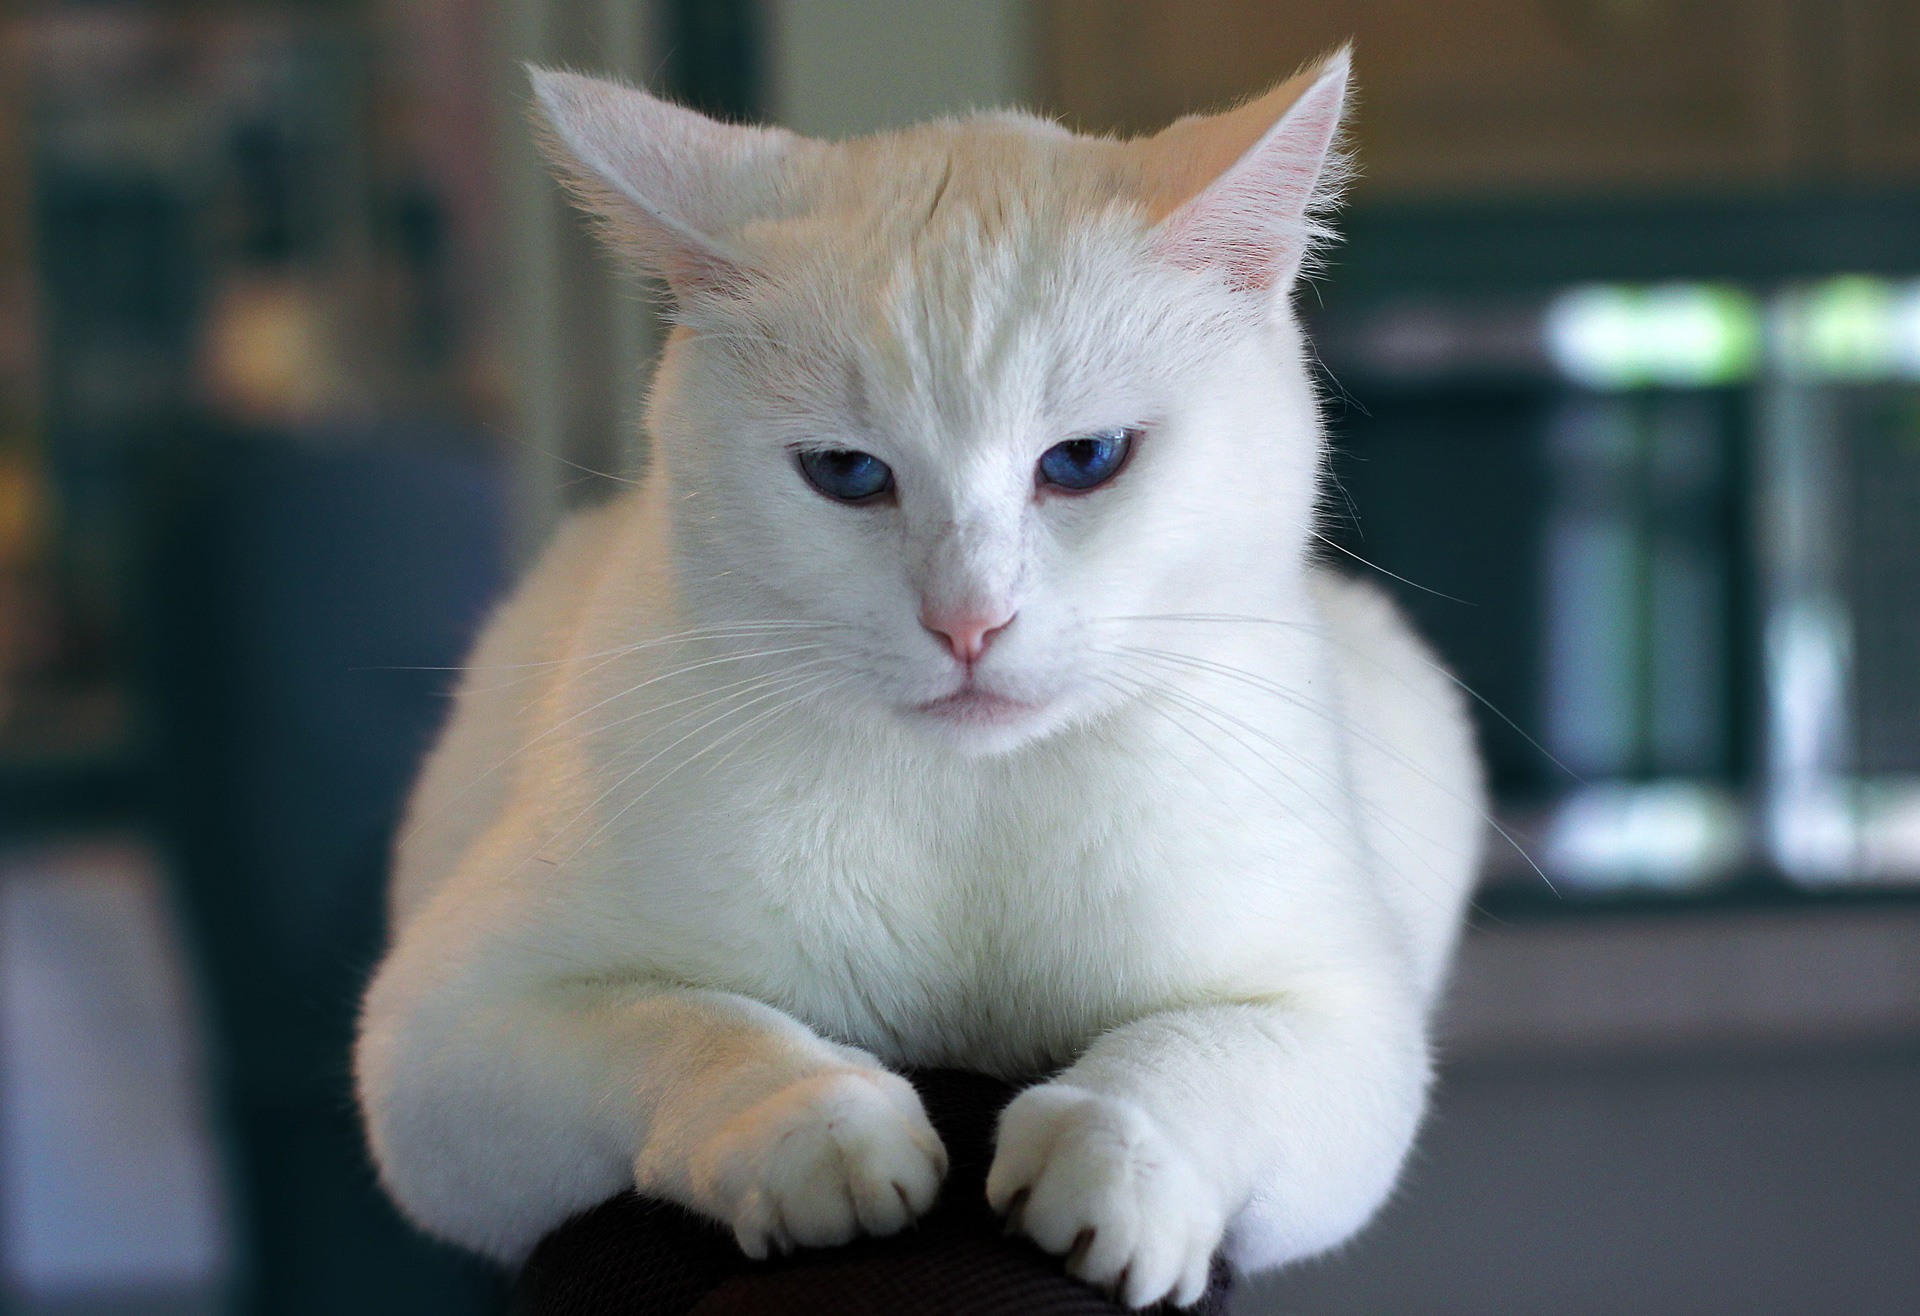 How Rare Are Fully White Cats?